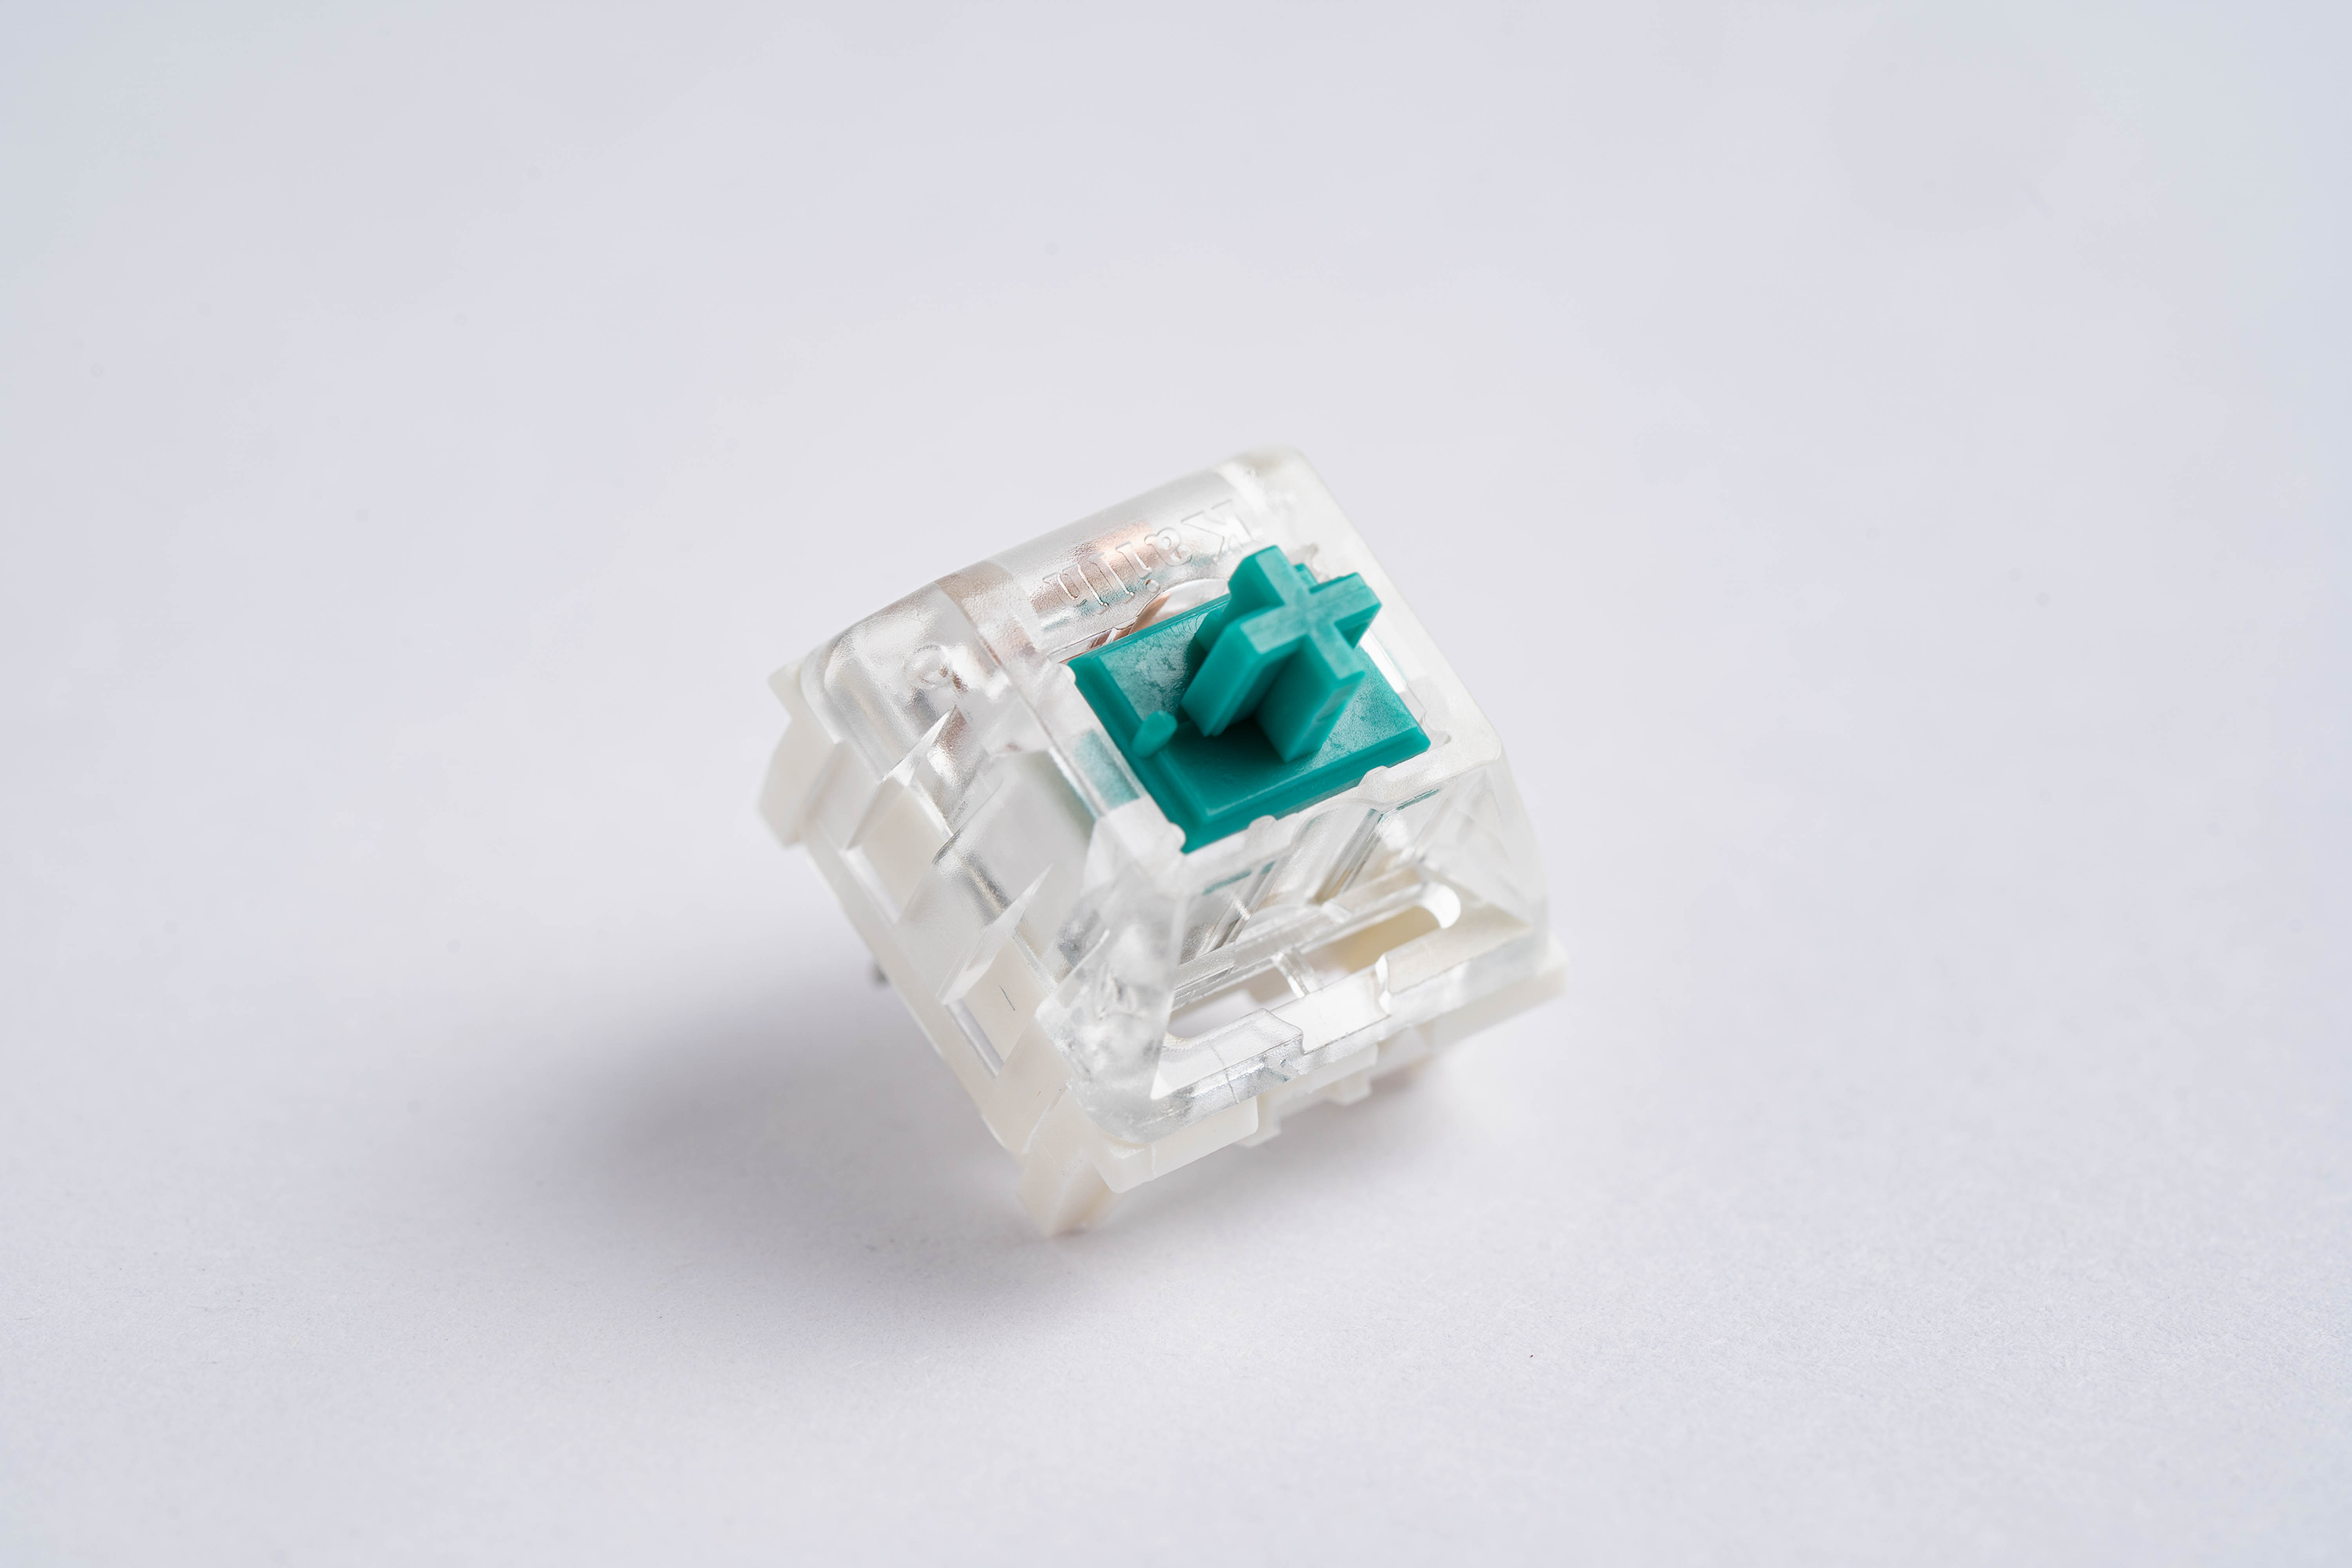 Kailh PRO Light Green Switches - KeebsForAll